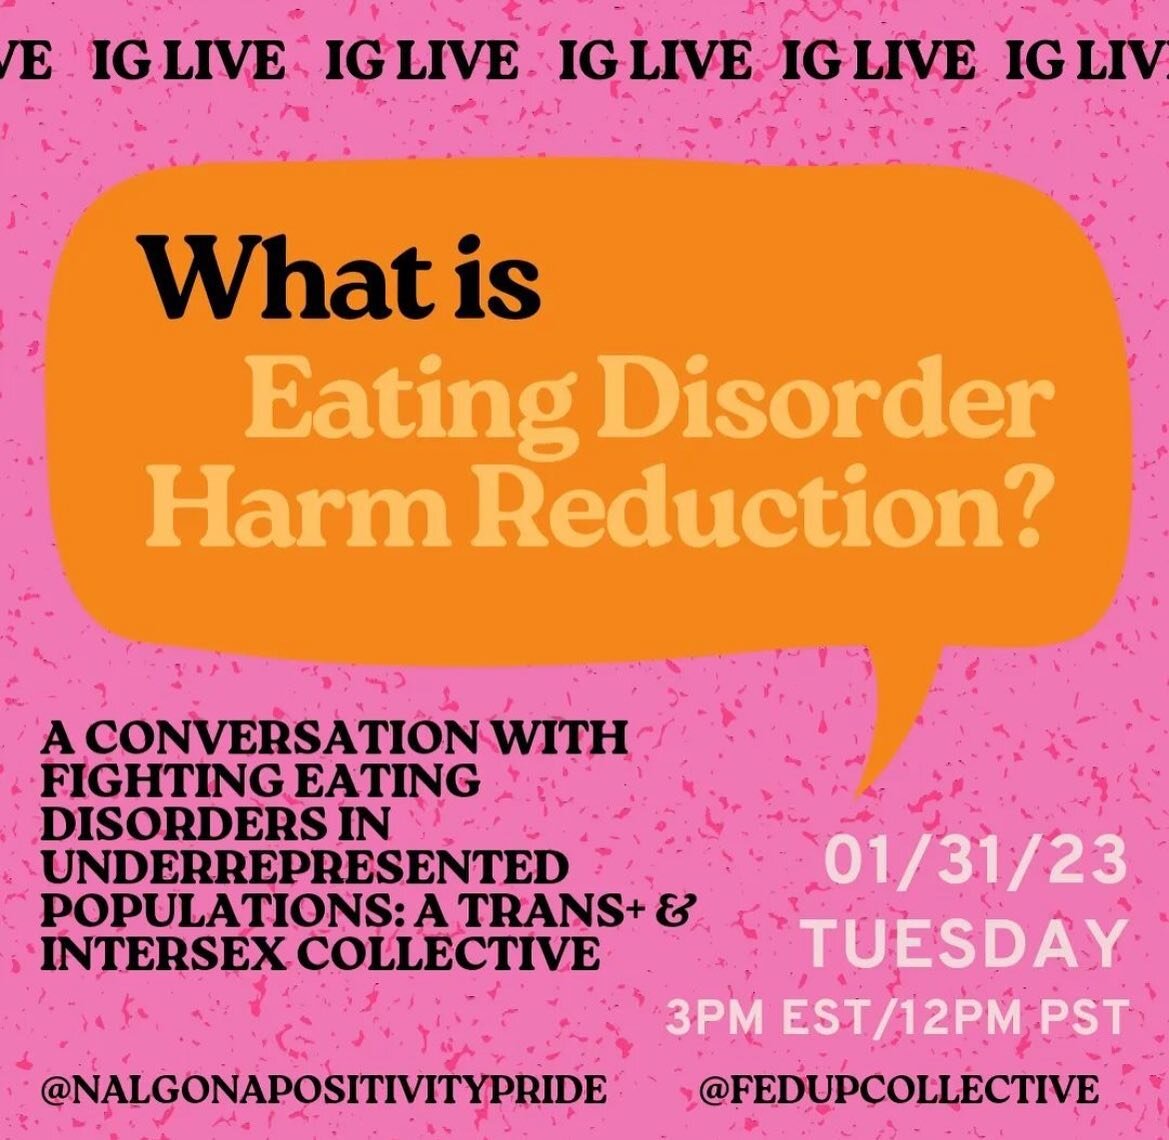 Join FEDUP members Cody (he/him) and Kevin (they/them) on January 31st at 3pm EST on Instagram live for a conversation about Eating Disorder Harm Reduction with Gloria Lucas (she/her)! 
Gloria Lucas is an eating disorders awareness activist that spec